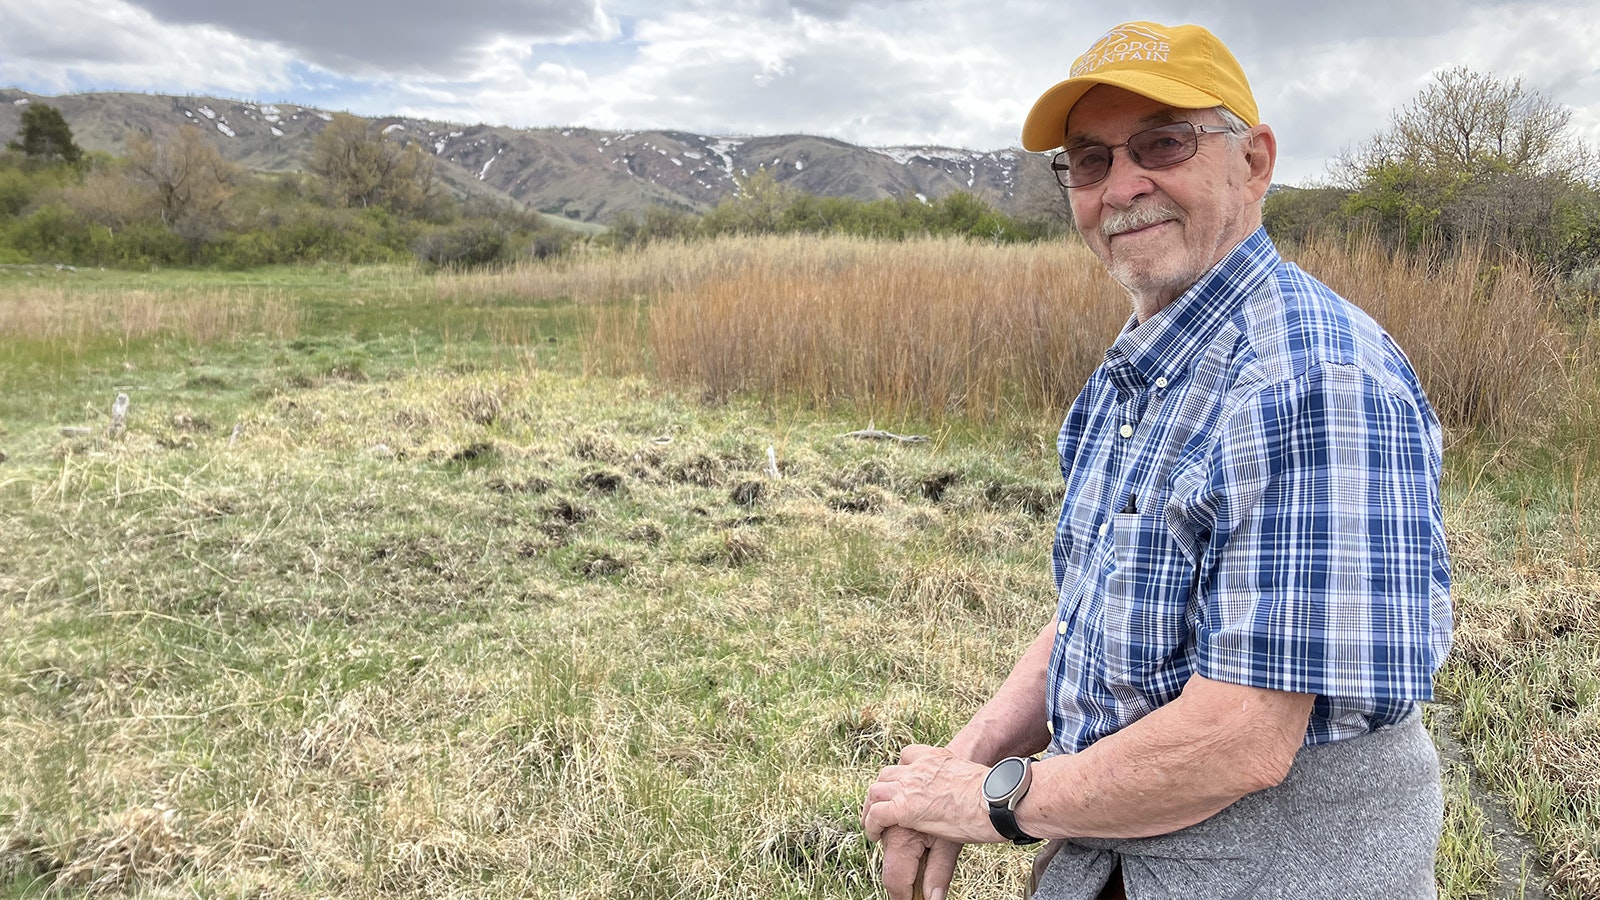 Glenn Bochmann said he has spent years enjoying the nature and beauty at the base of Casper Mountain. He once found a buffalo skull there and his wife’s family homesteaded at the base of the mountain. He is “deadly against” the gravel pit.